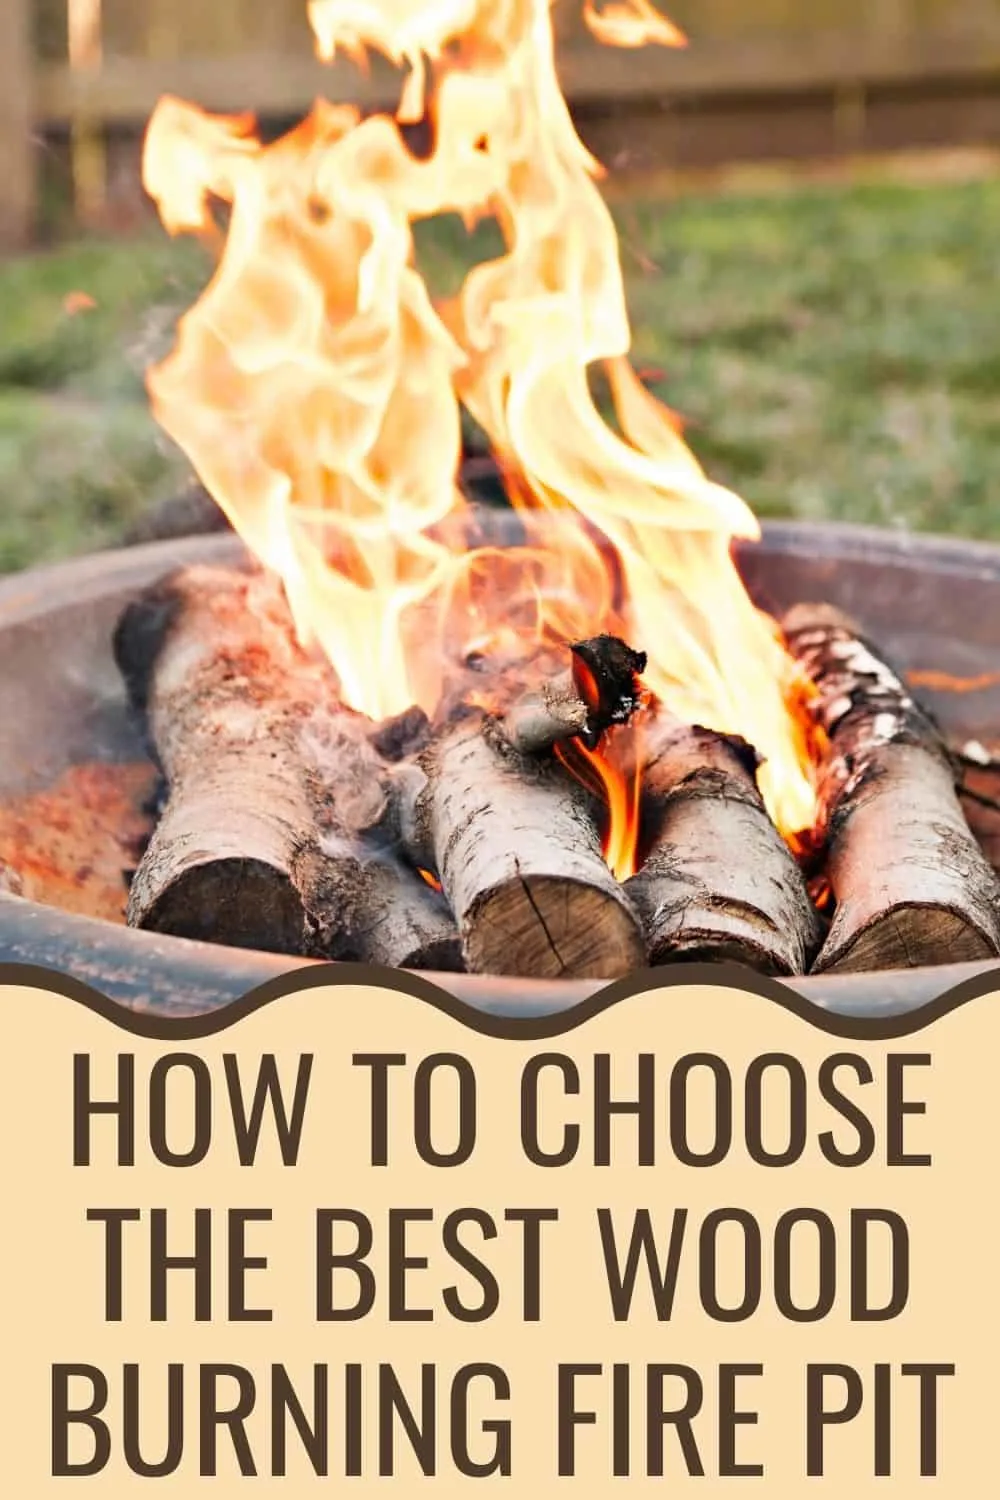 How to choose the best wood burning fire pit